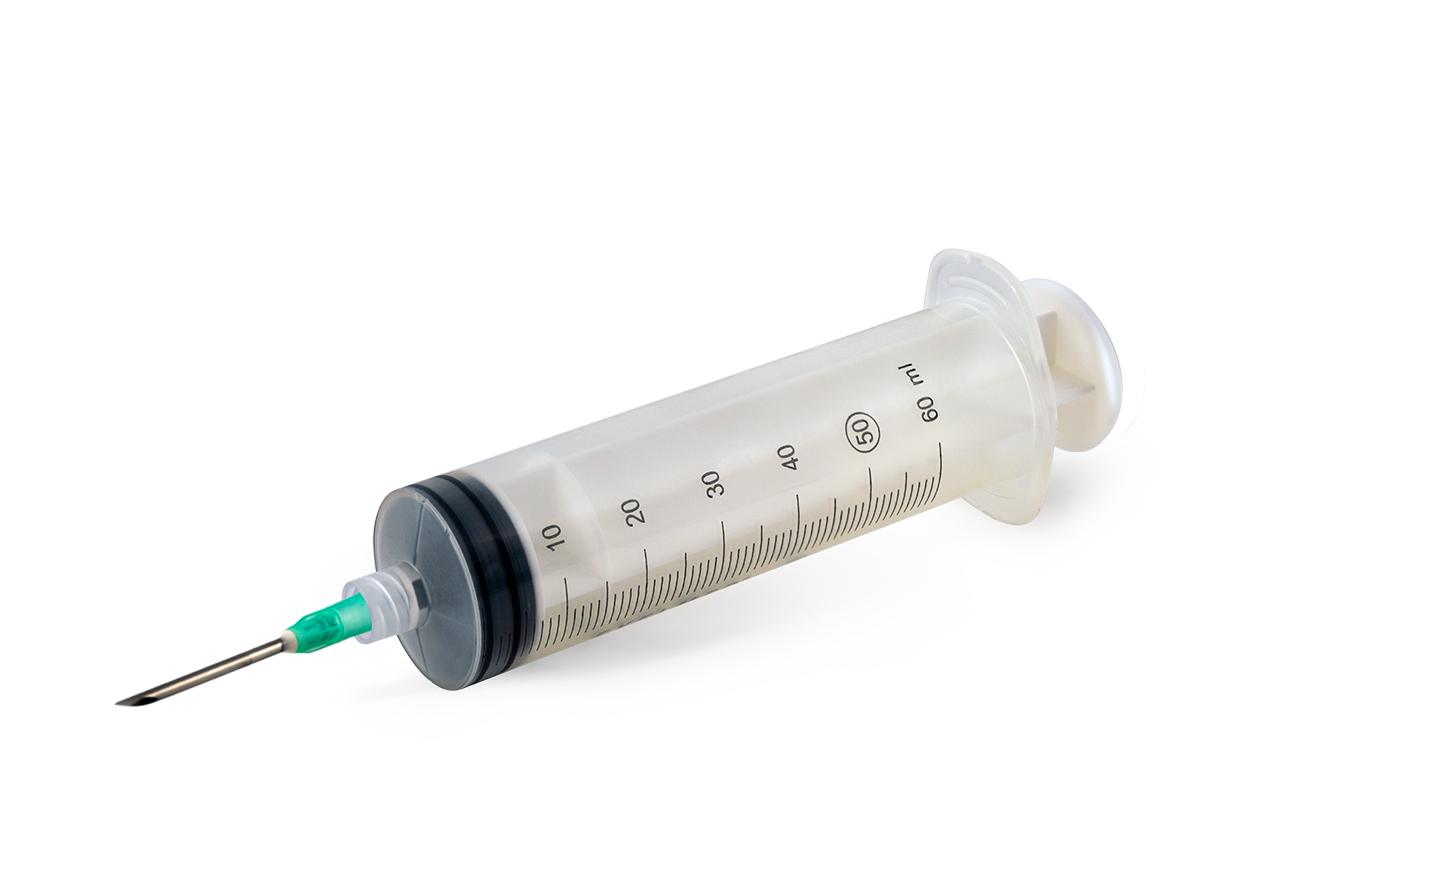 Transparent syringe with needle for infusion systems.